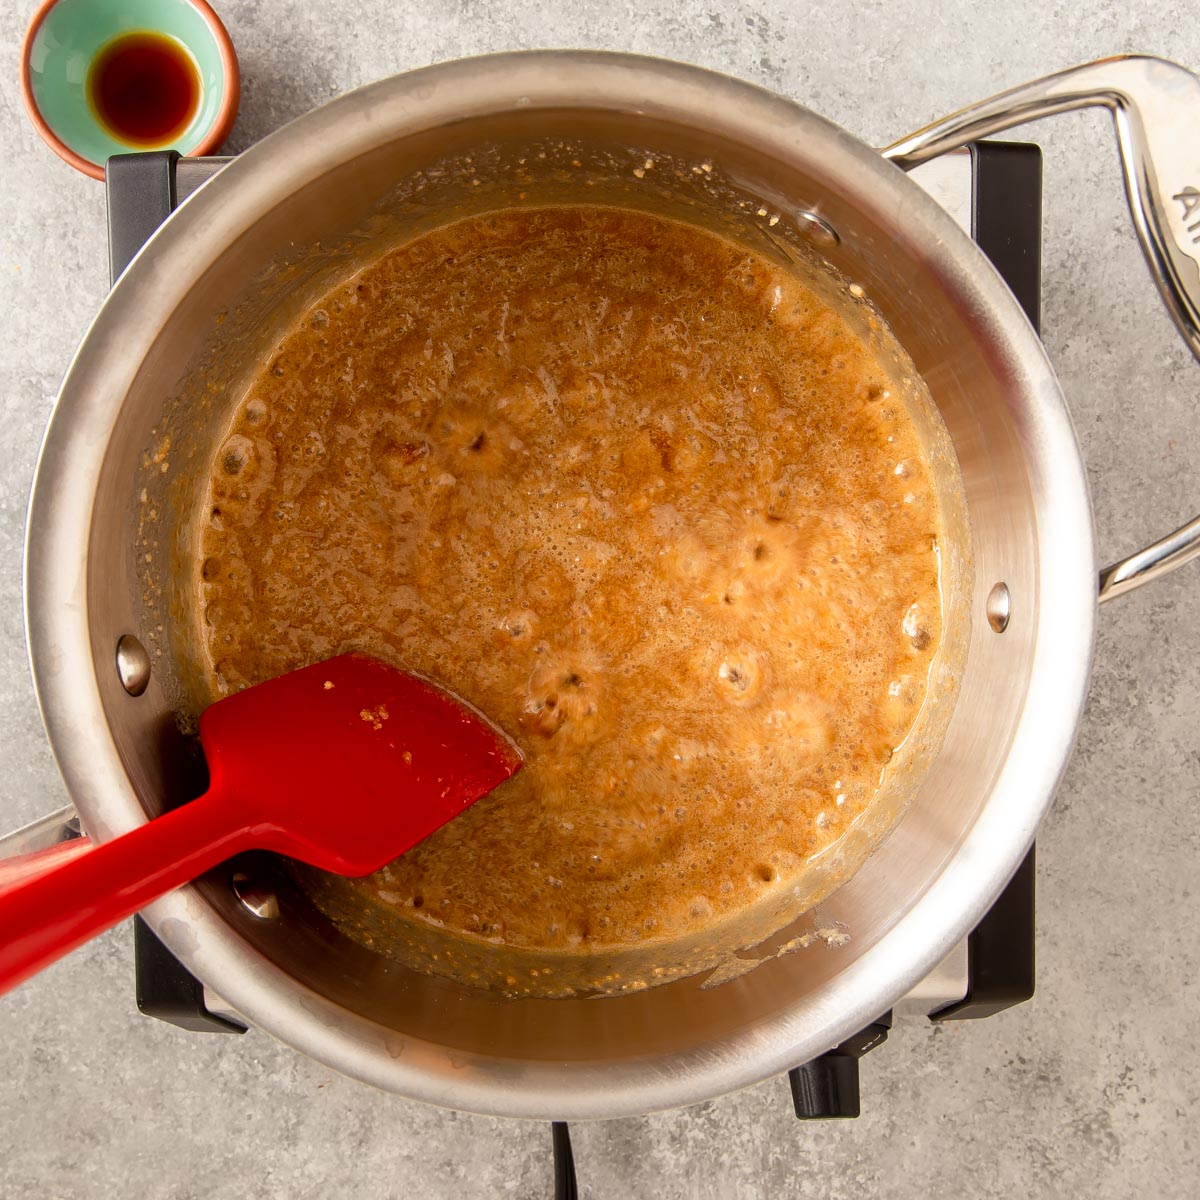 toffee mixture boiling in a pan